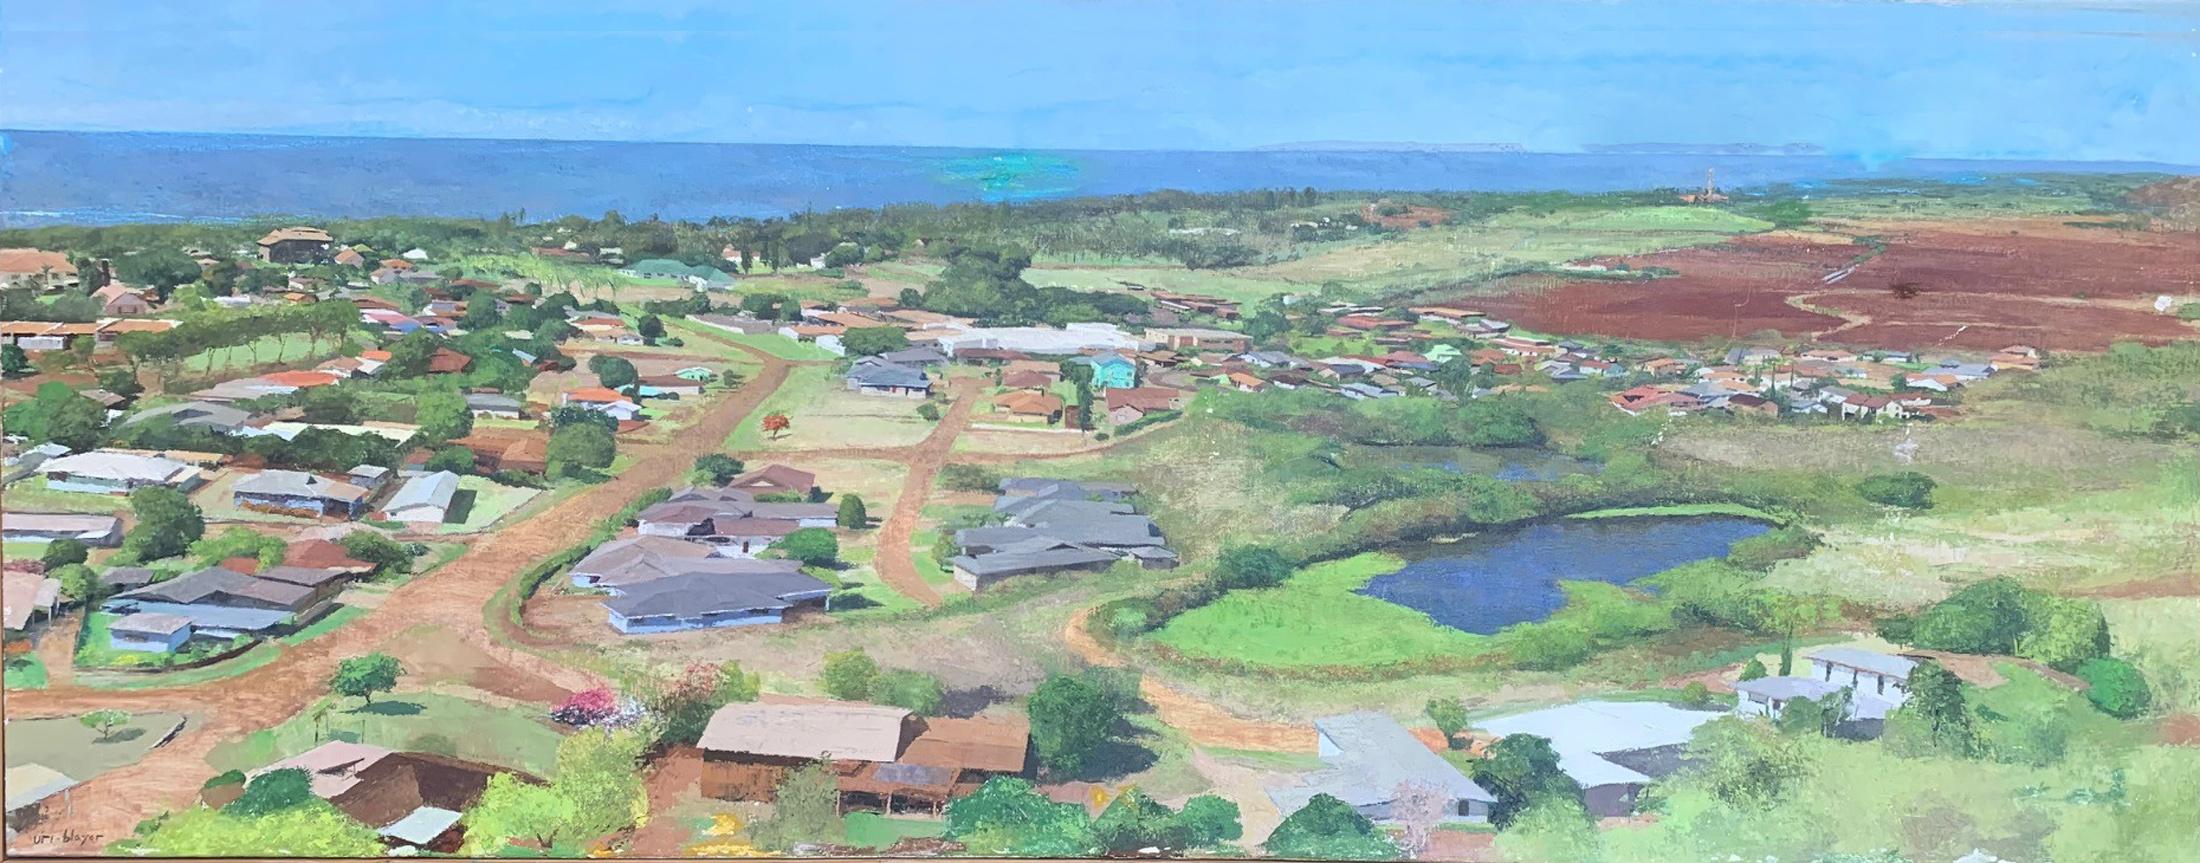 Uri Blayer Landscape Painting - ‘Afternoon In Kauai'  Large Panoramic  Landscape  Oil On Canvas